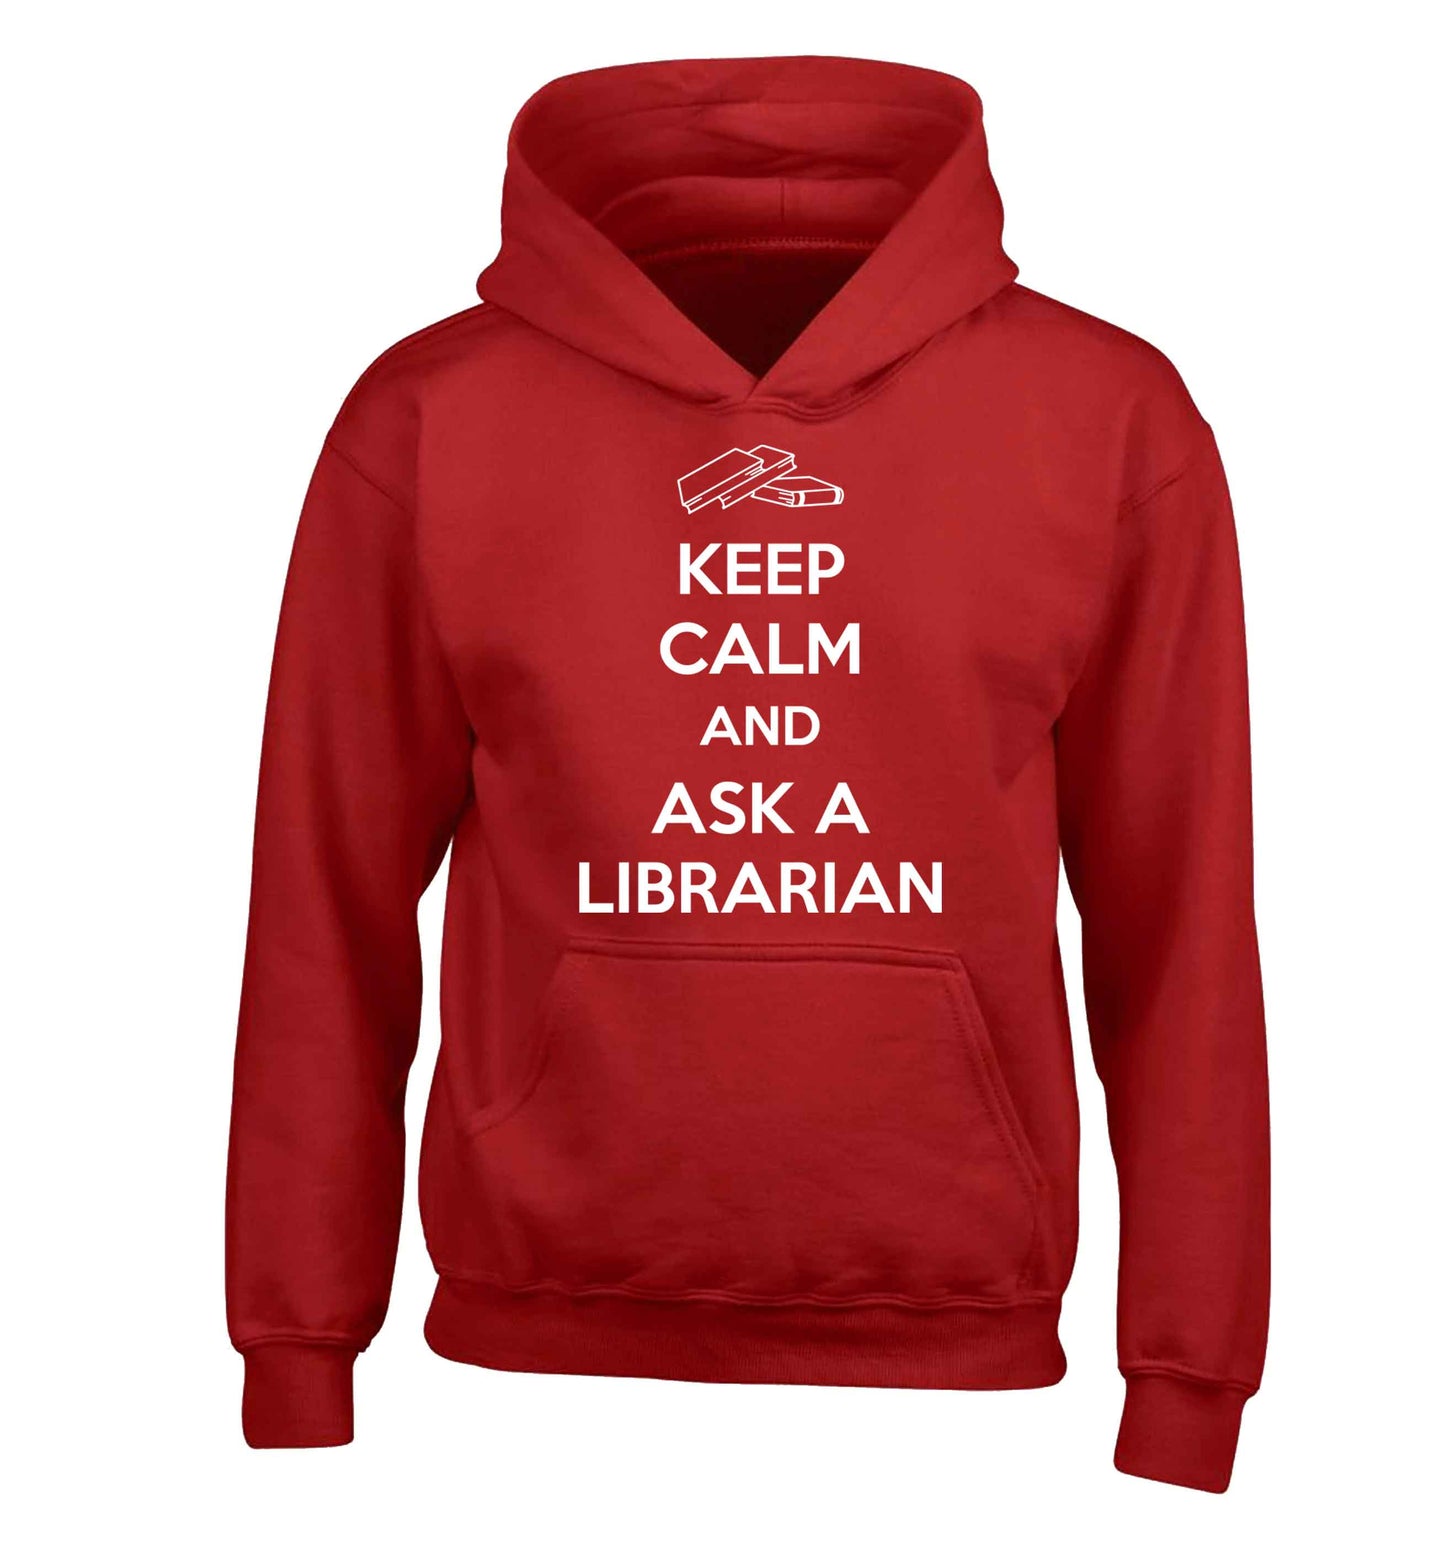 Keep calm and ask a librarian children's red hoodie 12-13 Years